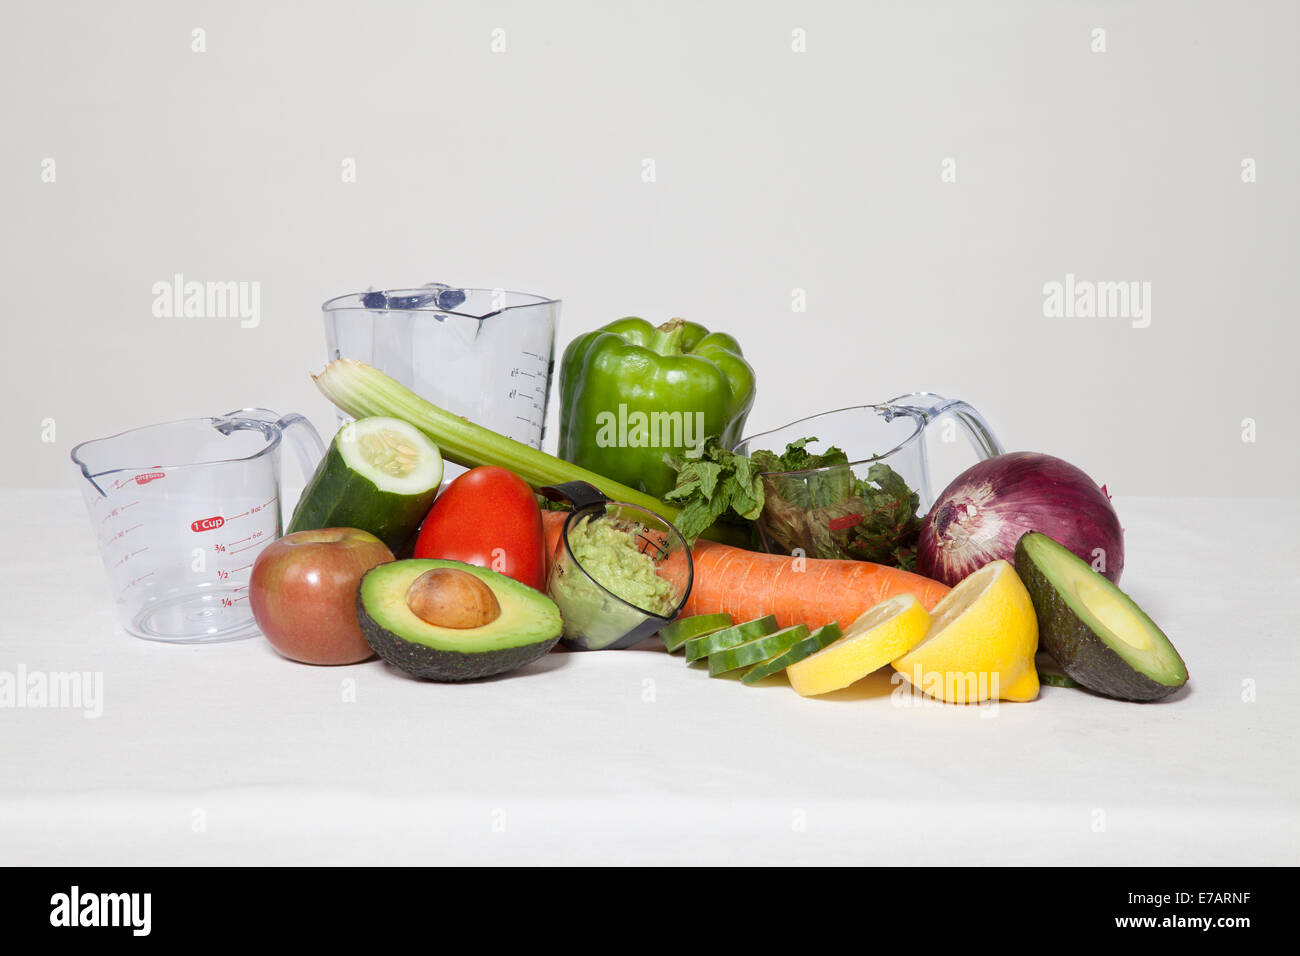 A view of a still life composed of various fruits and vegetables in order to portray clean eating lifestyle. Stock Photo